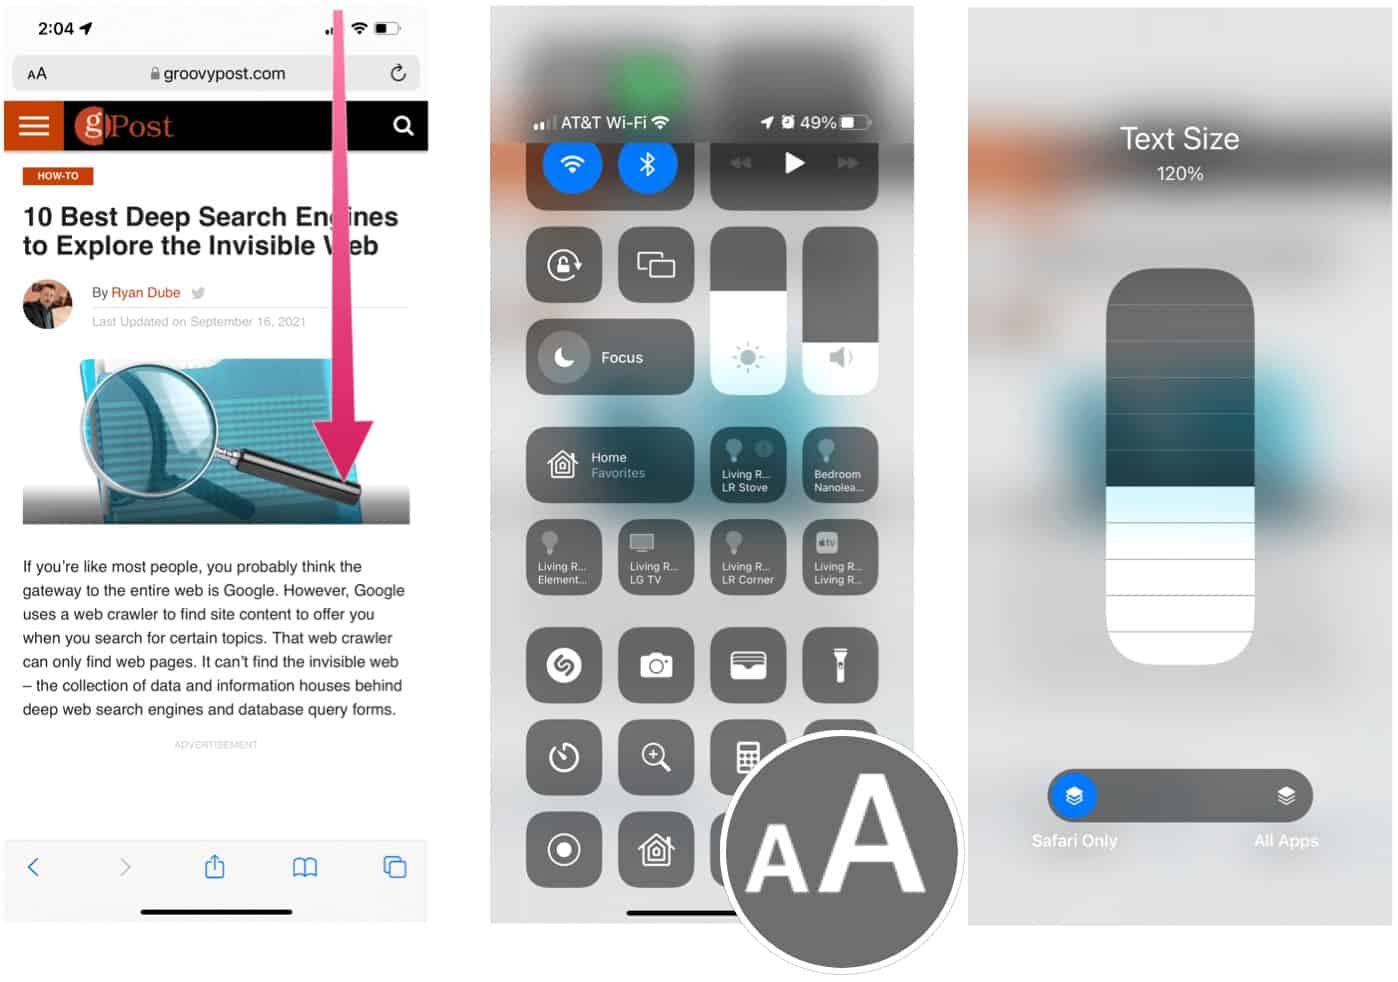 7 Hidden iOS 15 Features to Try on Your iPhone - 69